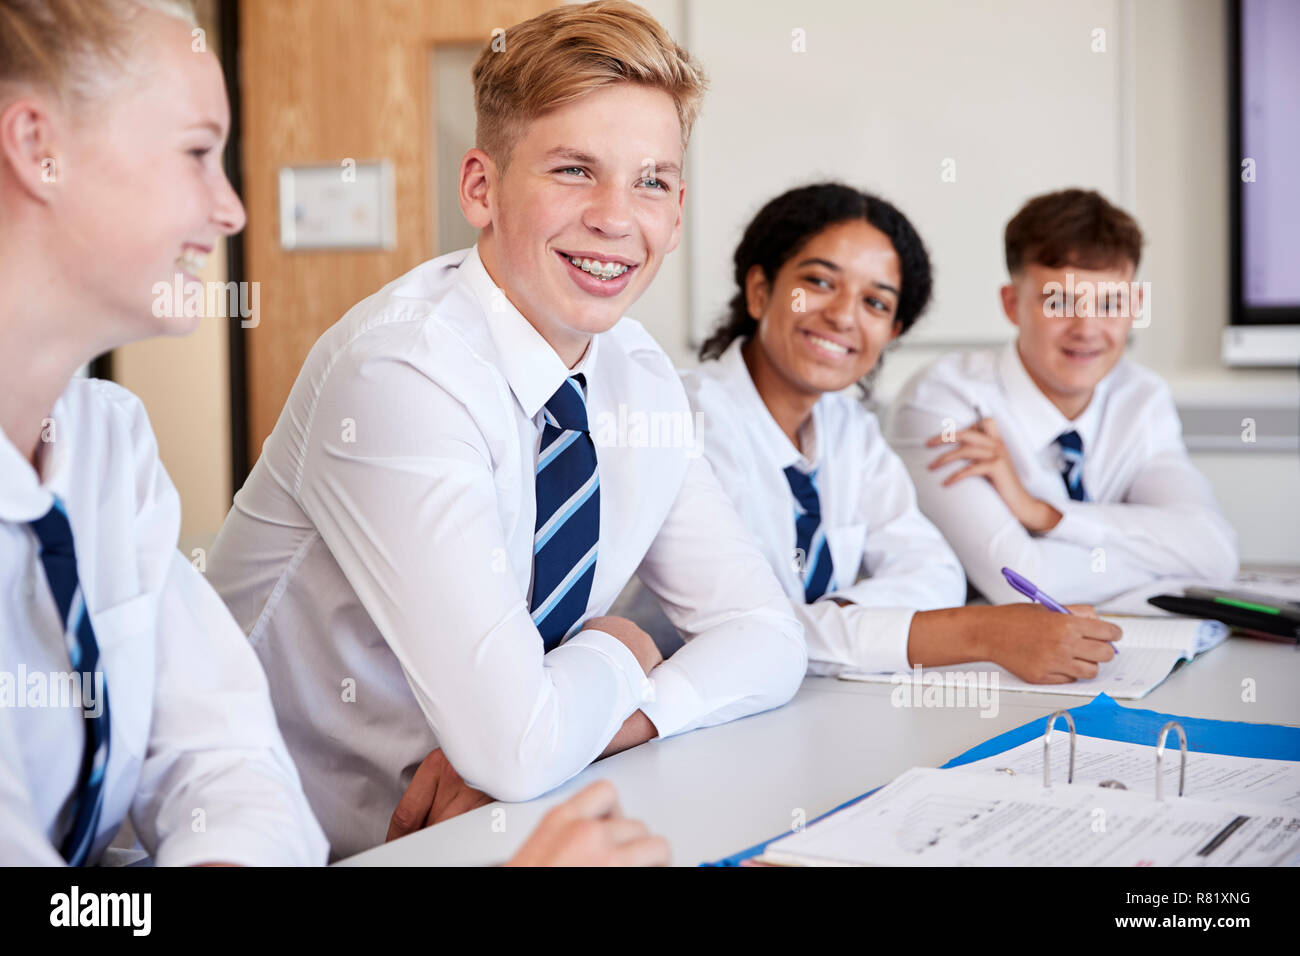 Line Of High School Students Wearing Uniform Sitting At Desk In Classroom Stock Photo